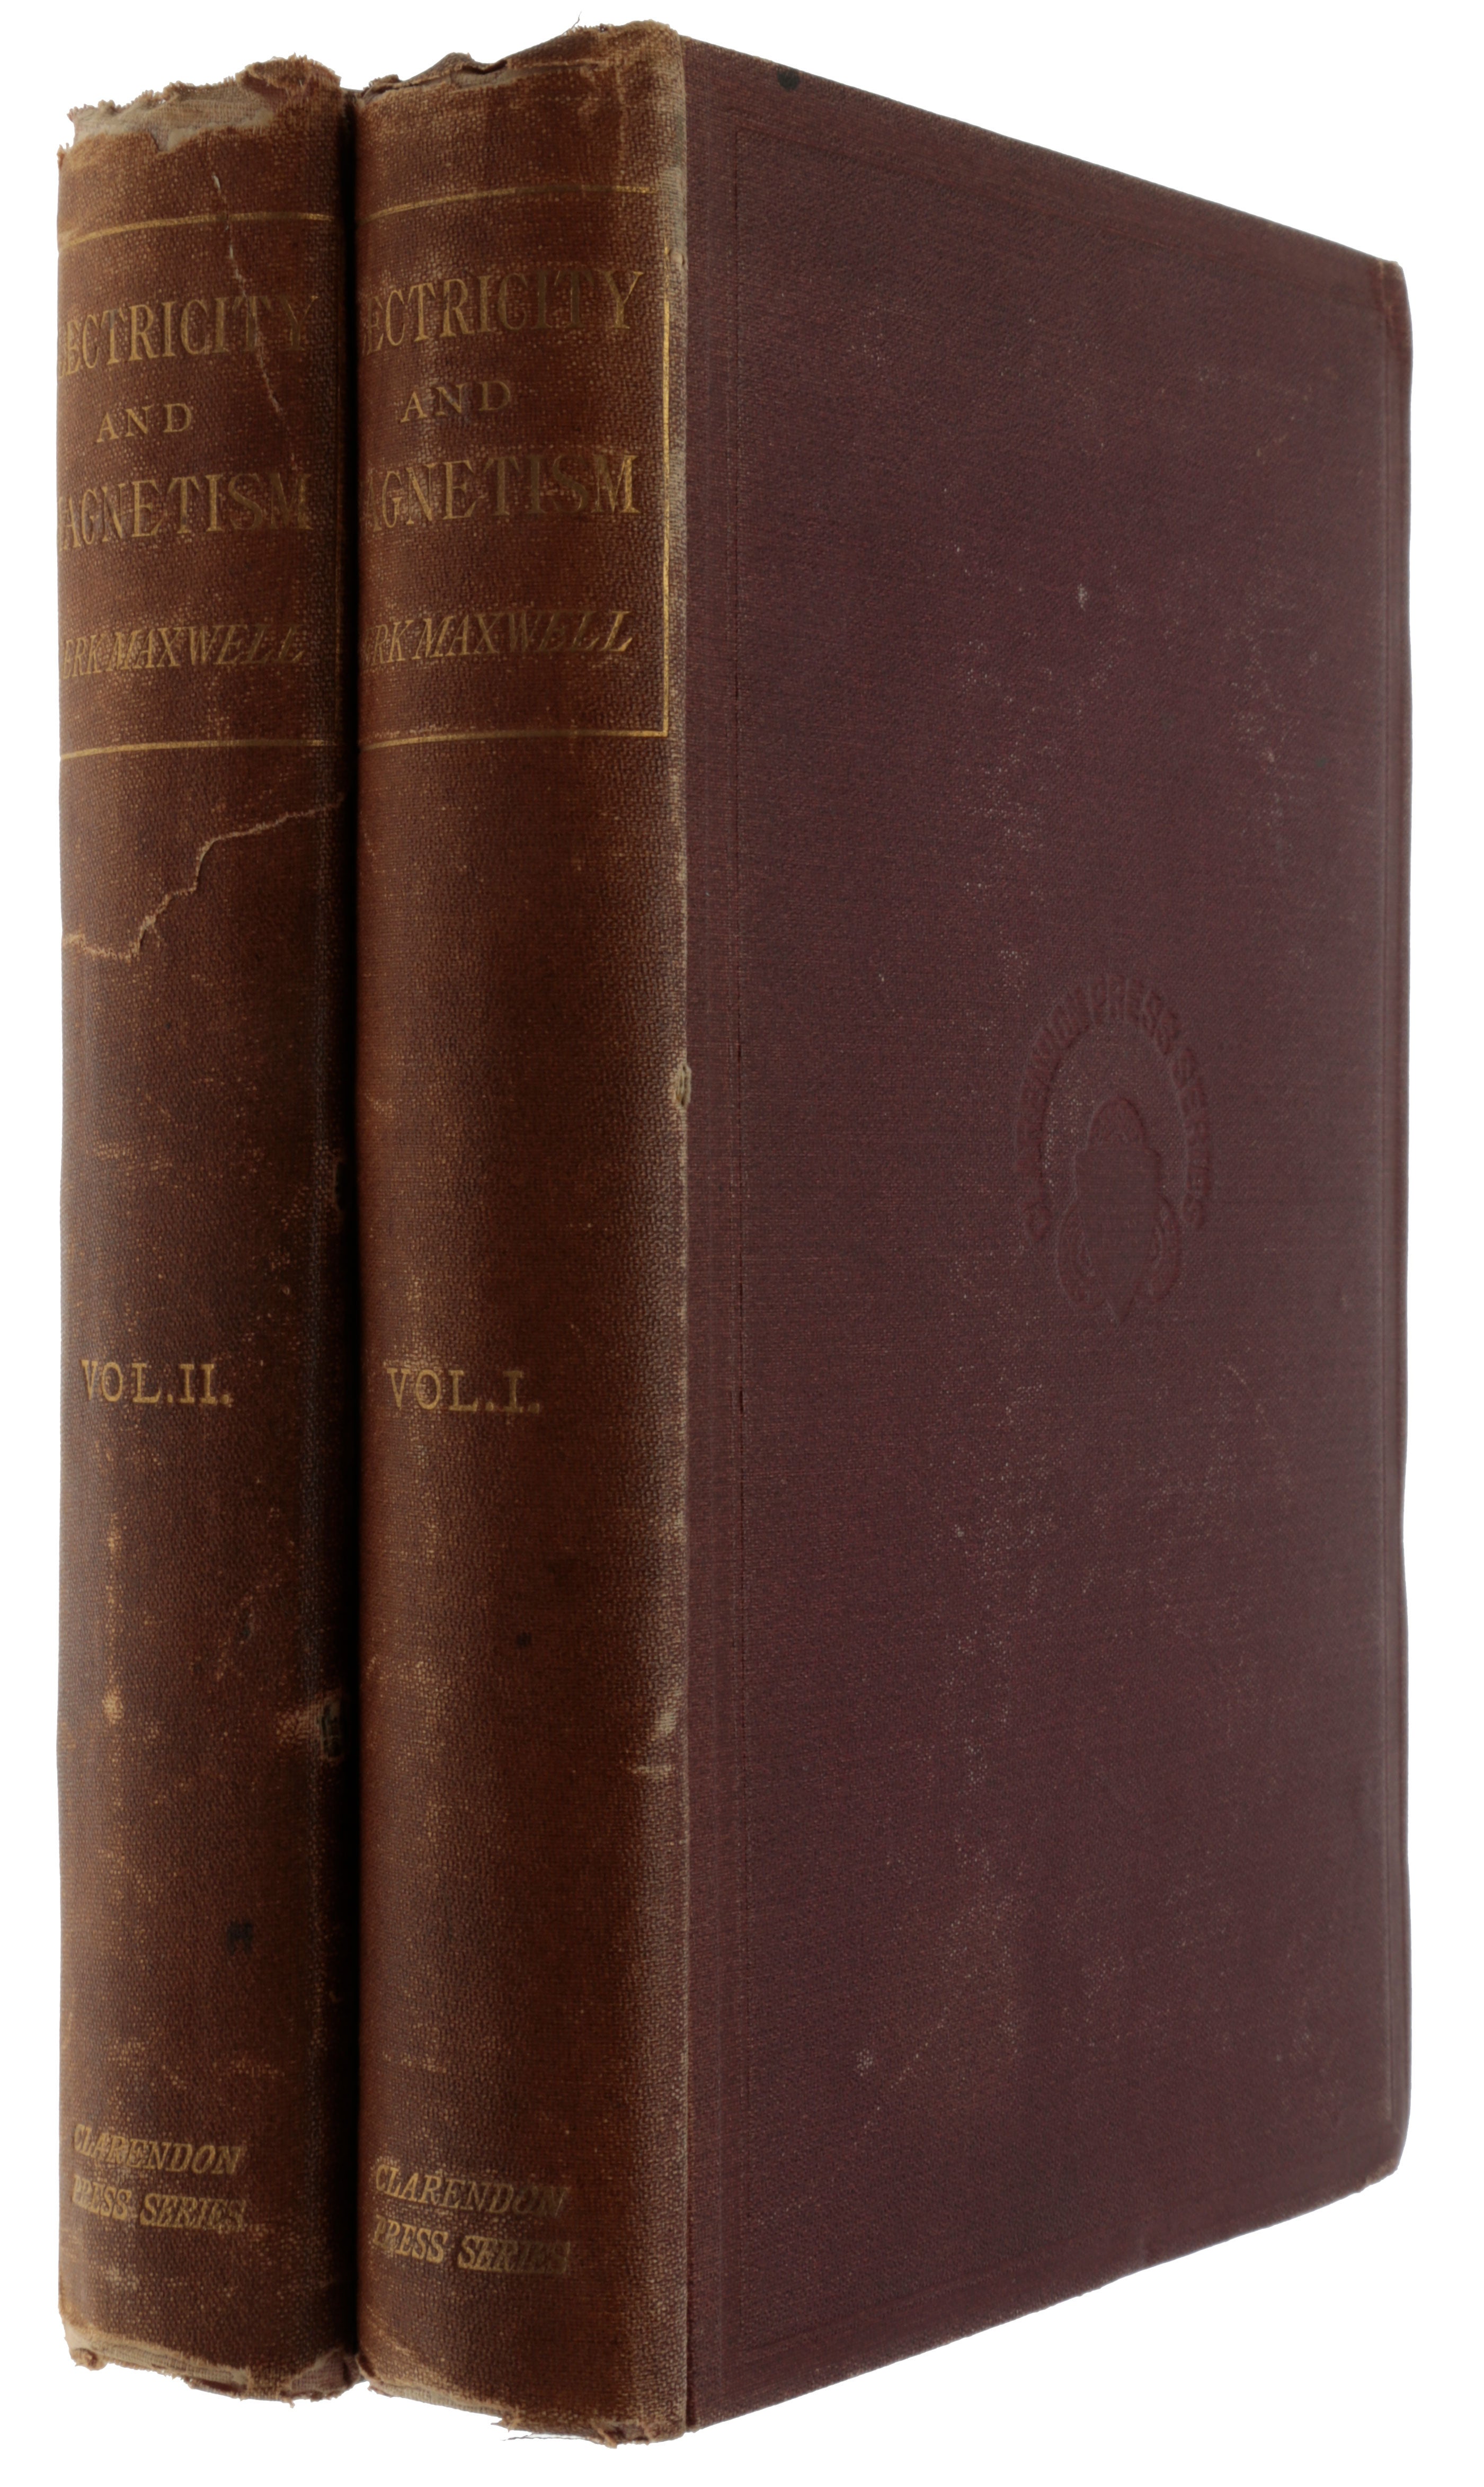 Item #5293 A Treatise on Electricity and Magnetism. James Clerk MAXWELL.